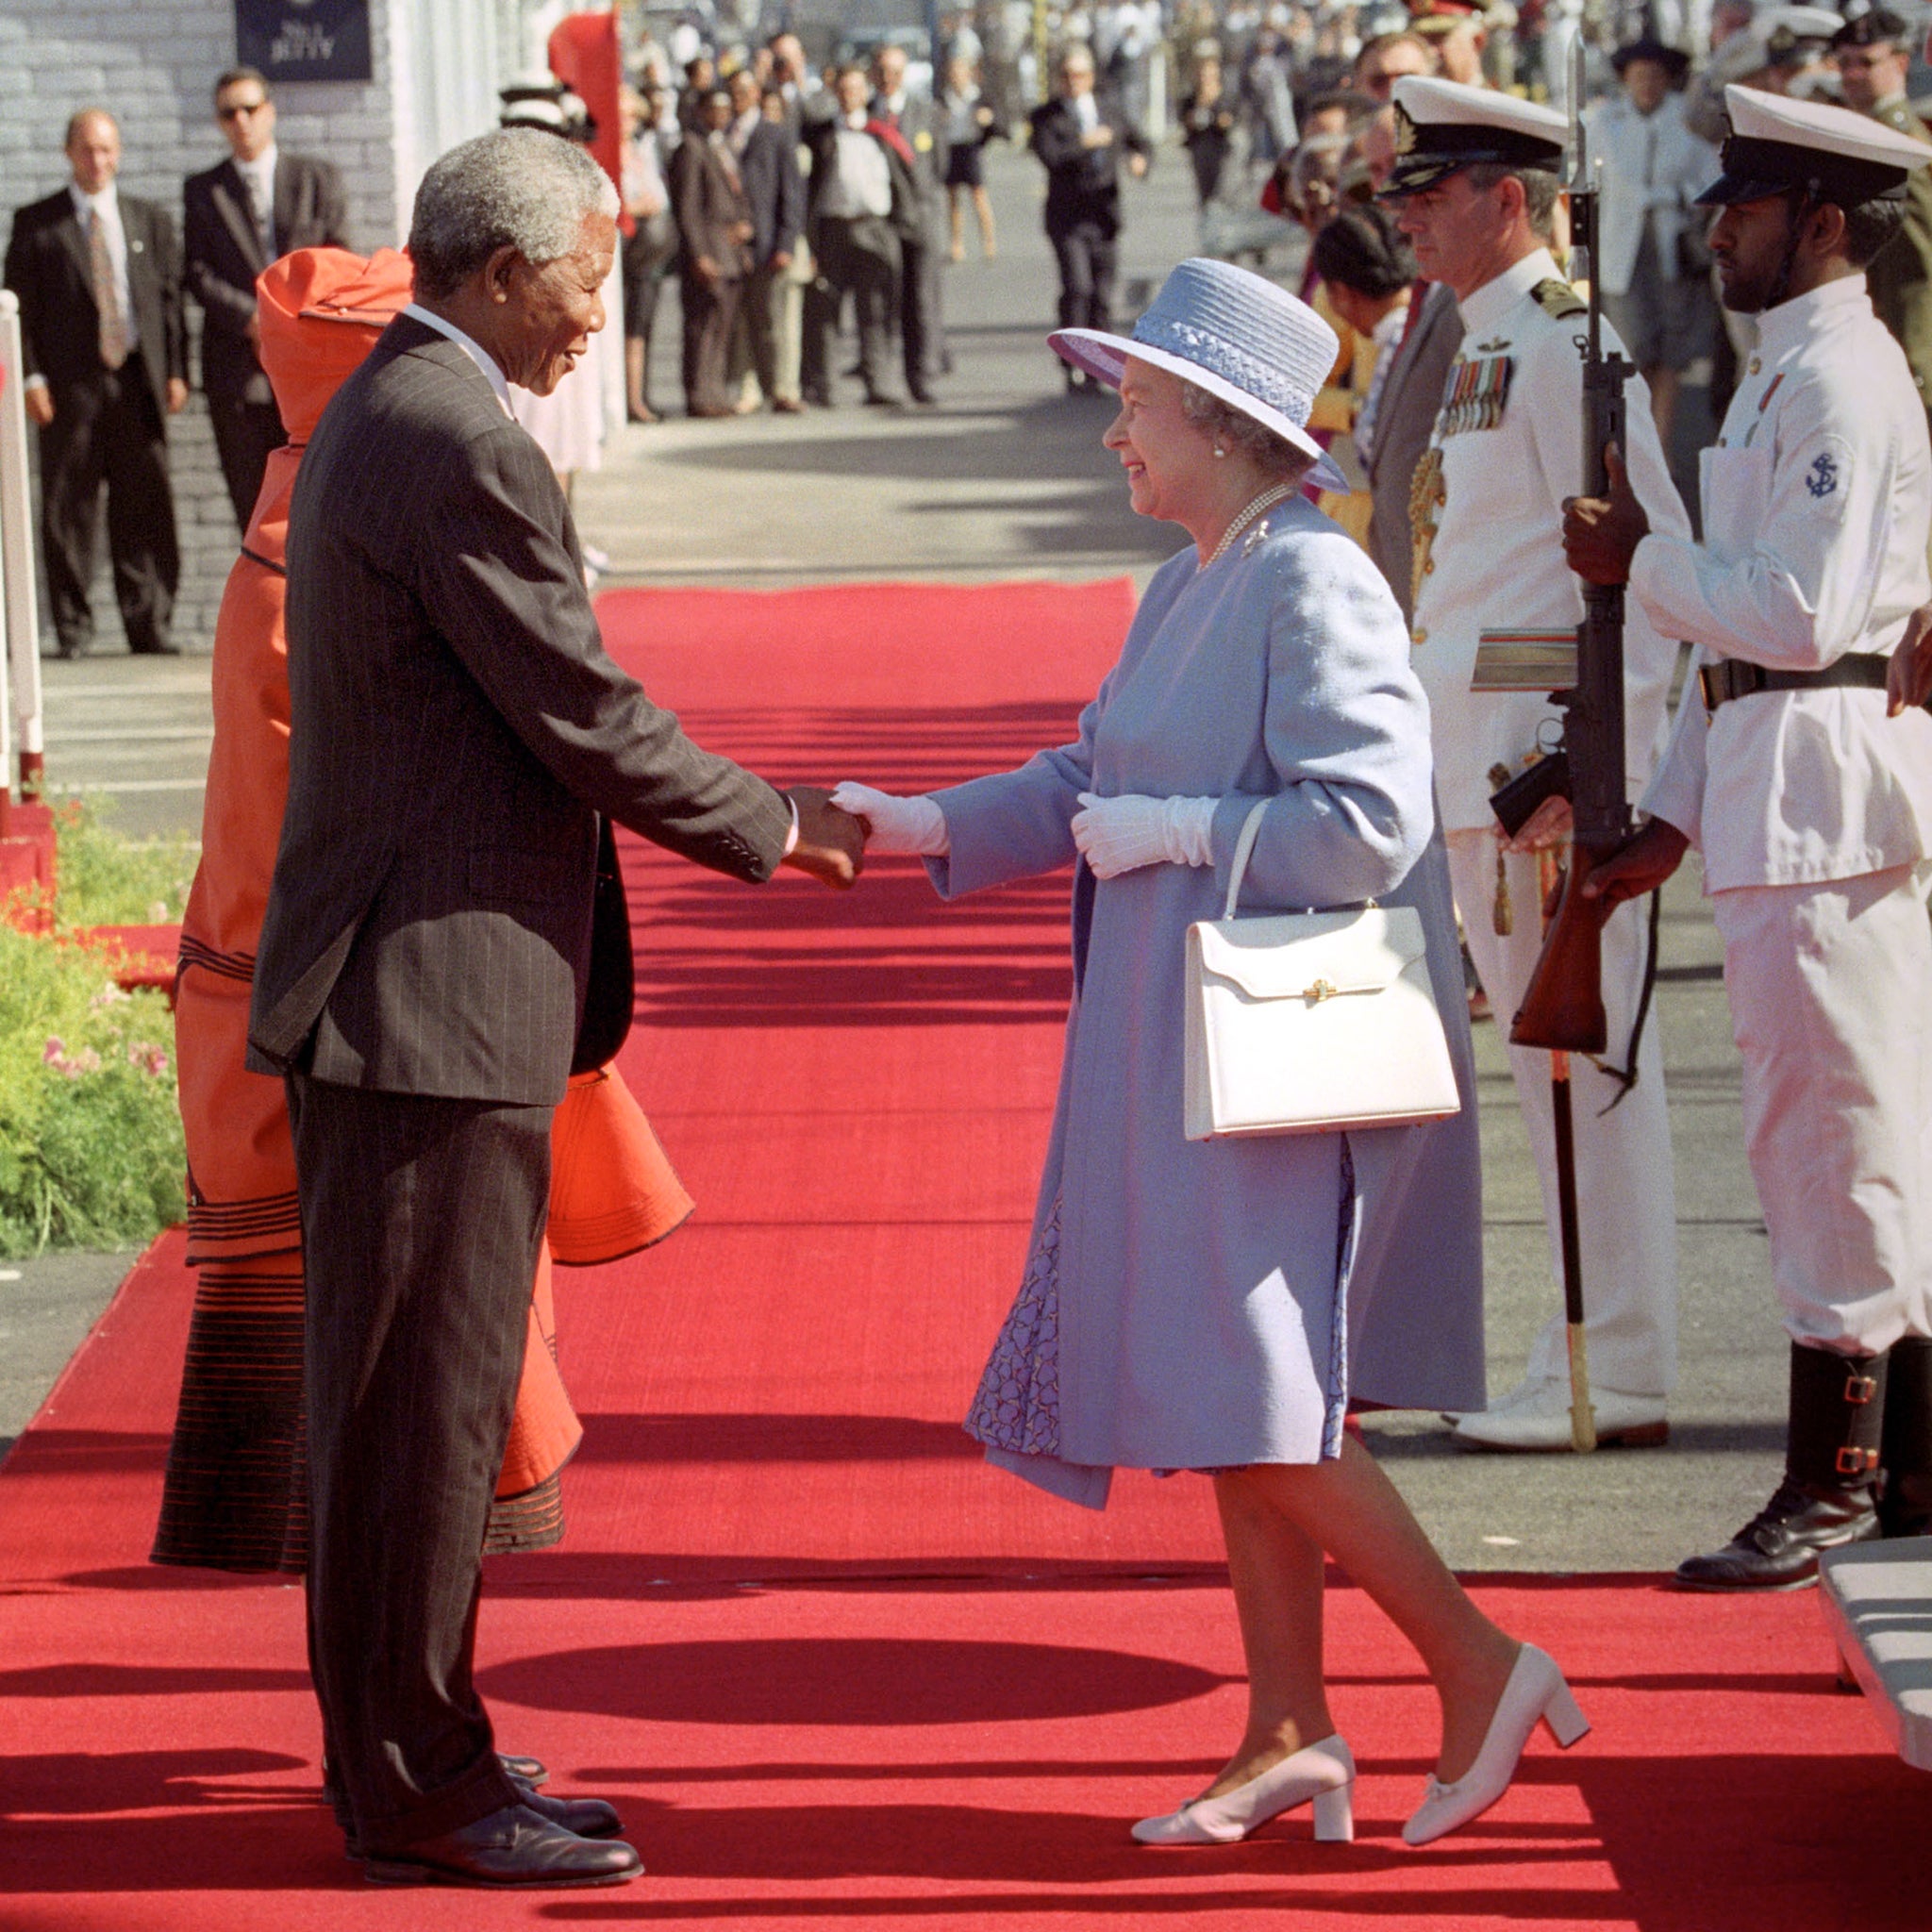 South Africa's President, Nelson Mandela, greets Queen Elizabeth II as she steps from the royal yacht Britannia in Cape Town in 1995. It’s her first visit to the country since 1947